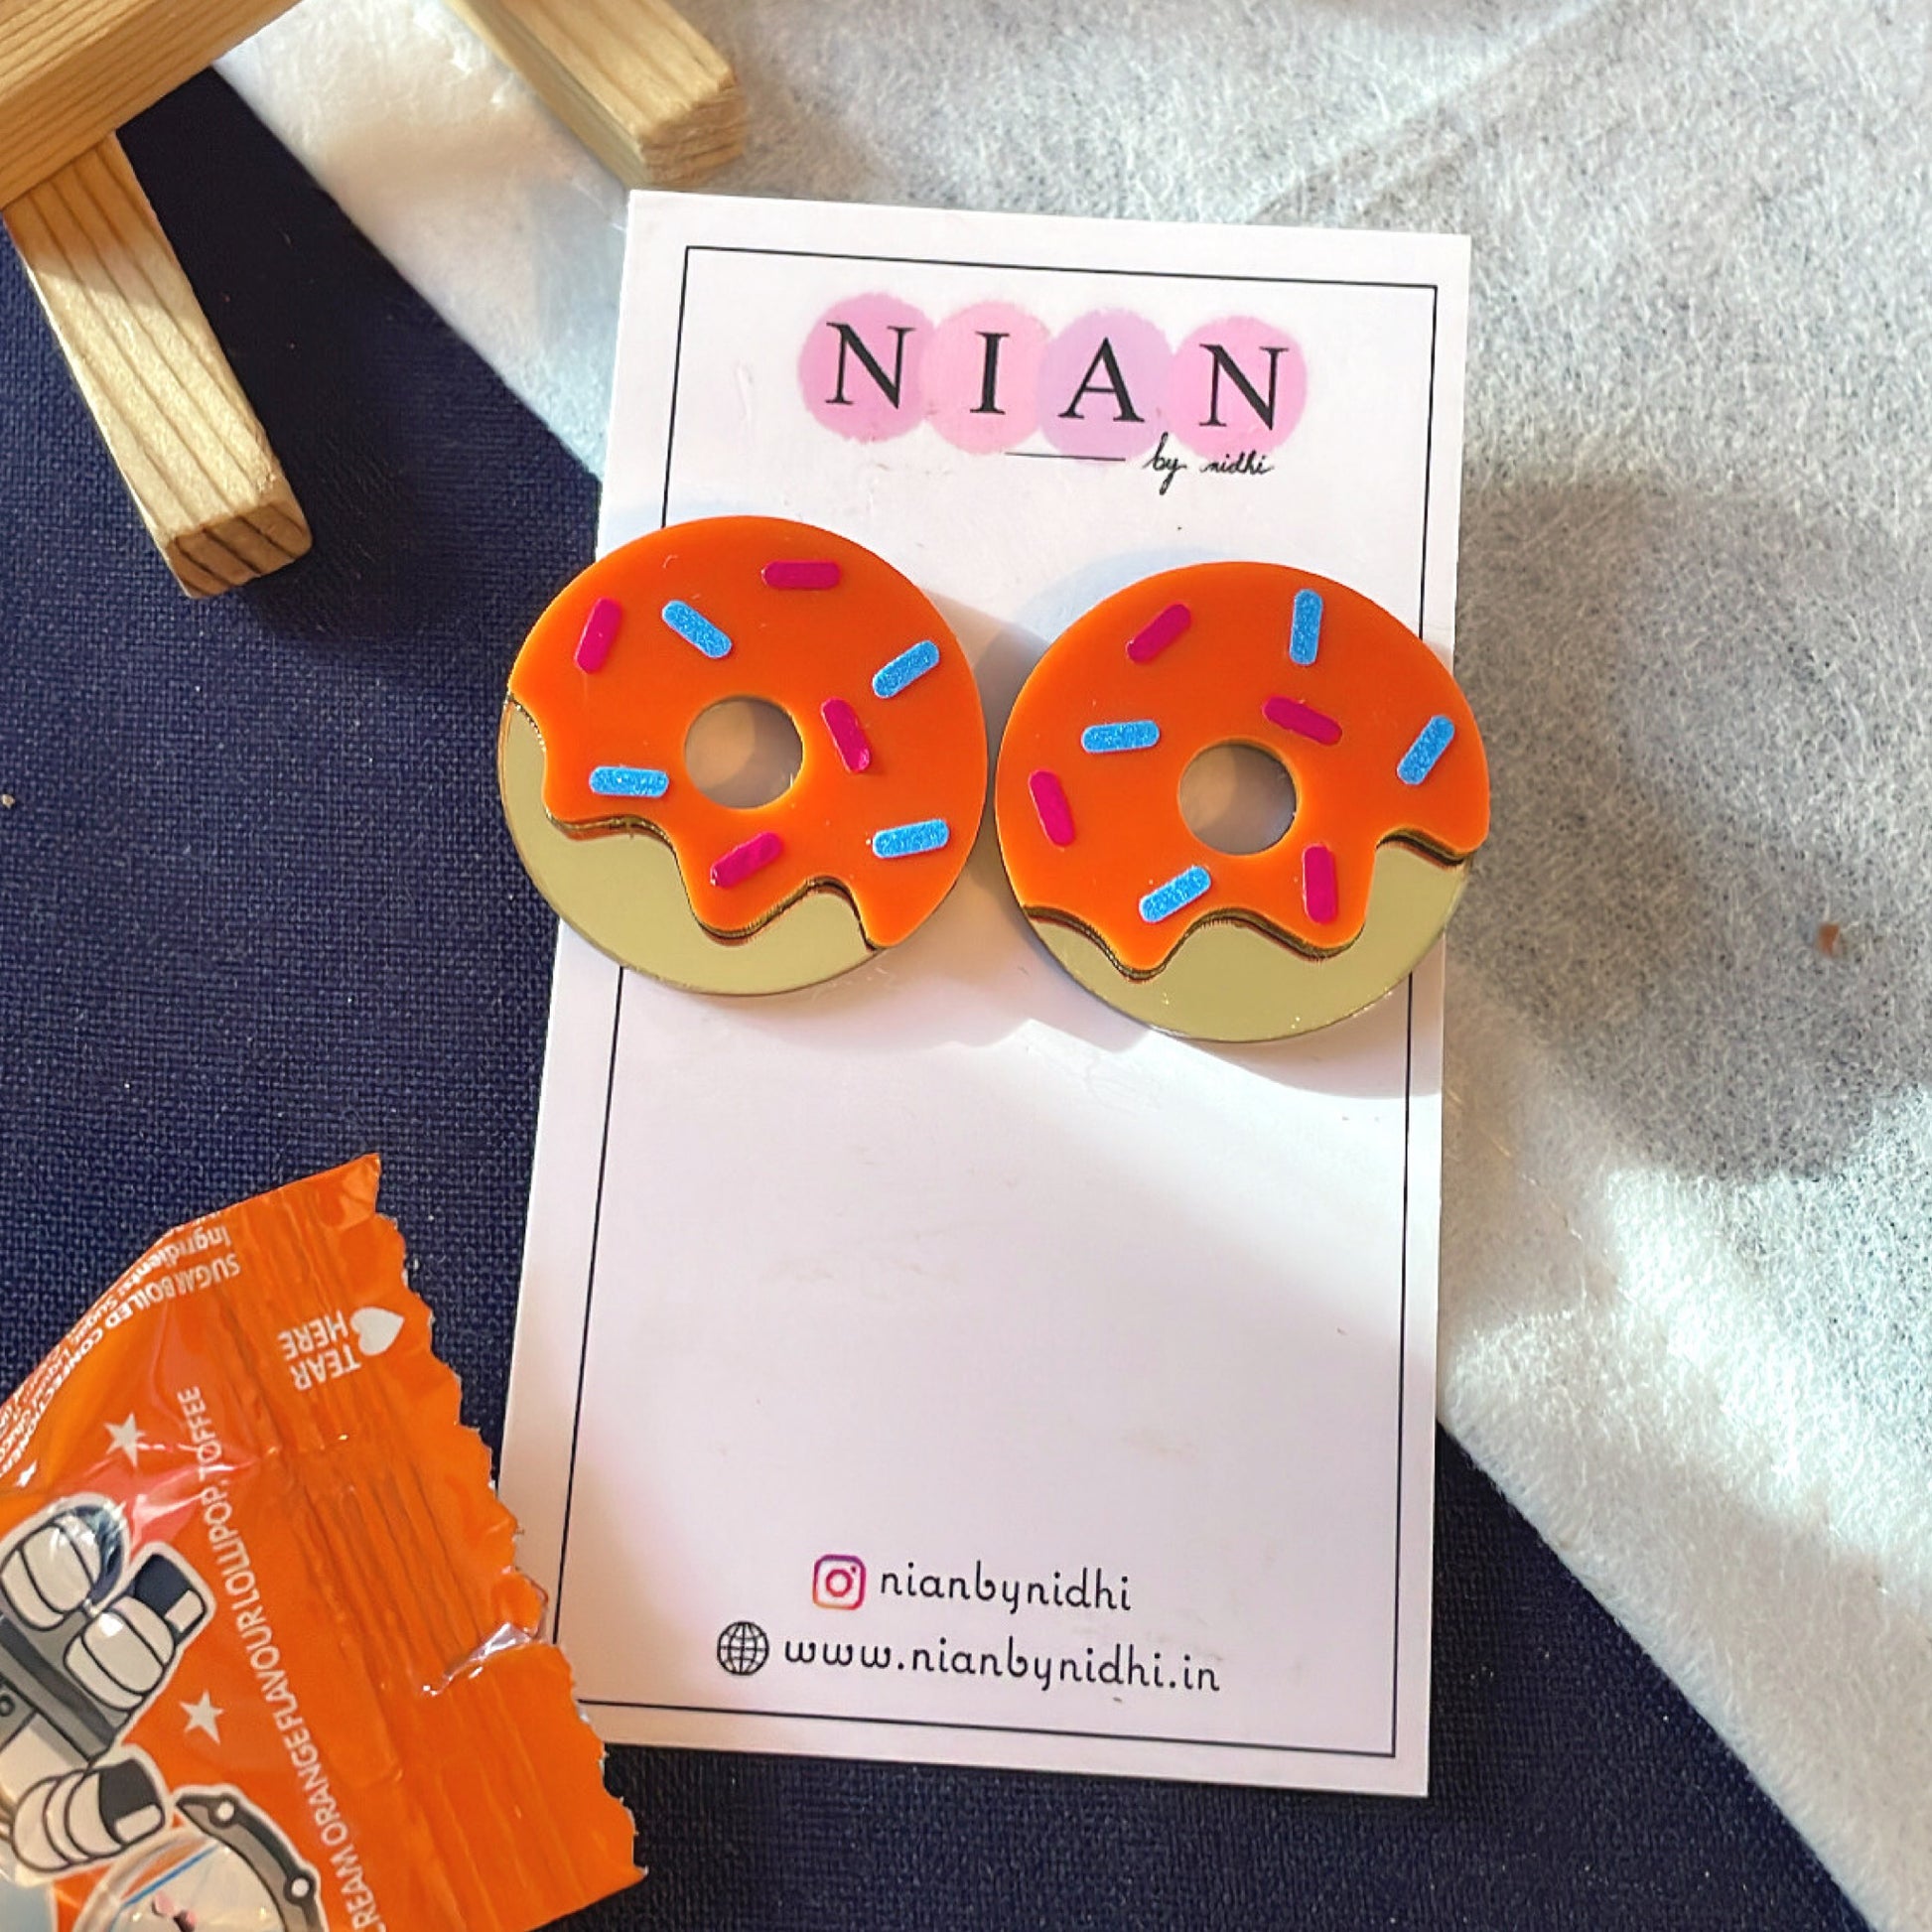 Donut Delight Earrings - Orange and Golden - Nian by Nidhi - placed in a white and blue background